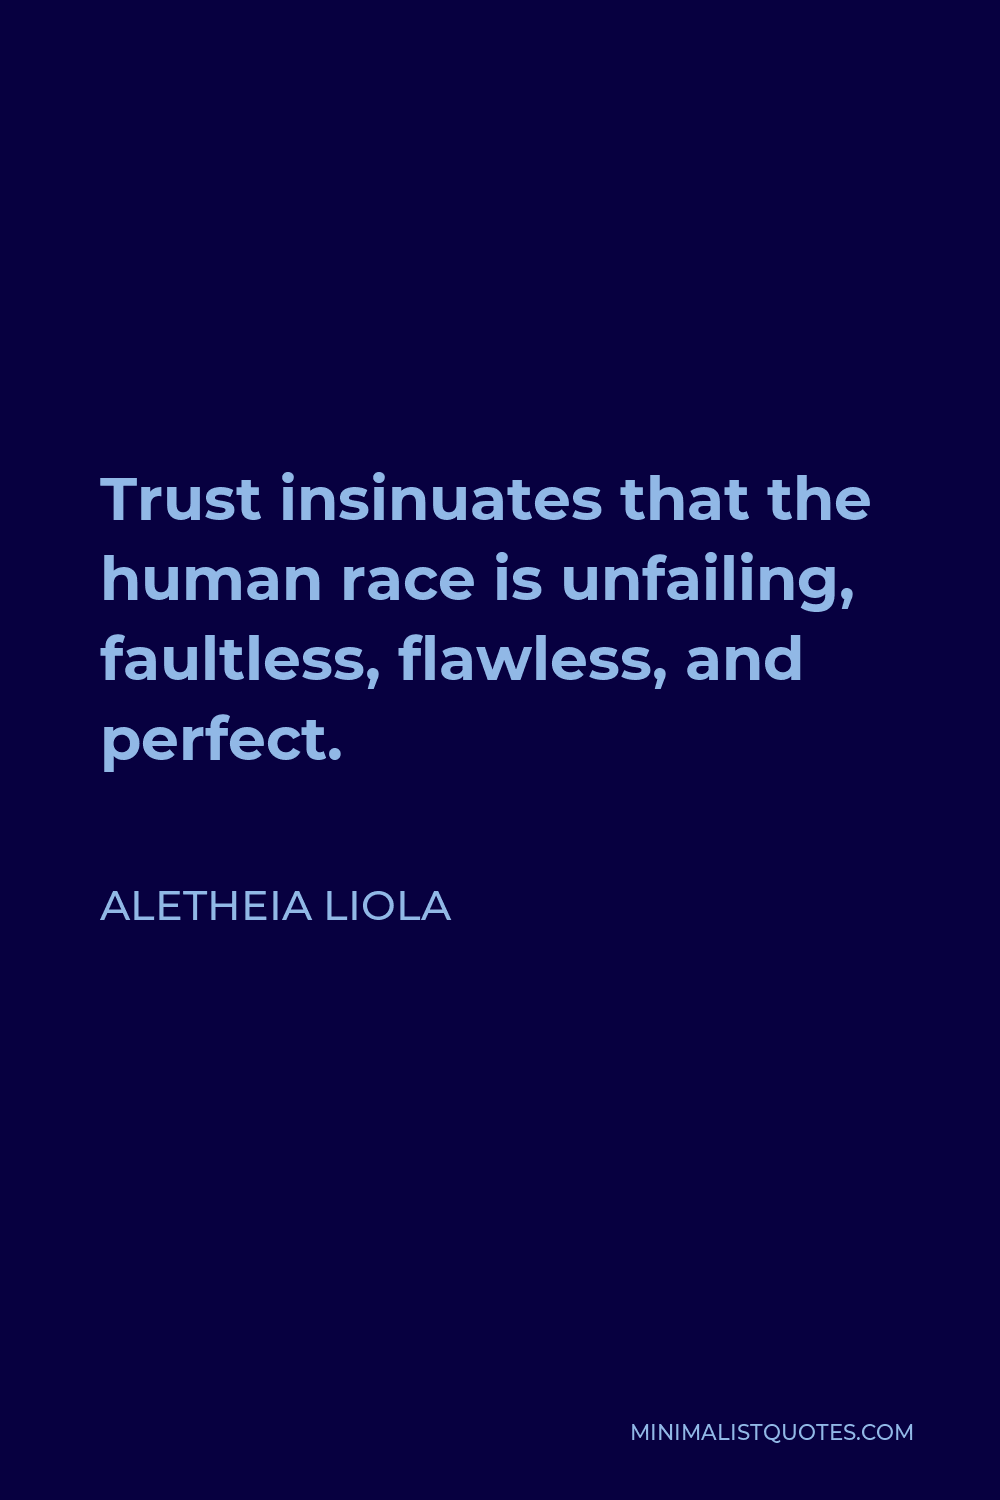 Aletheia Liola Quote - Trust insinuates that the human race is unfailing, faultless, flawless, and perfect.